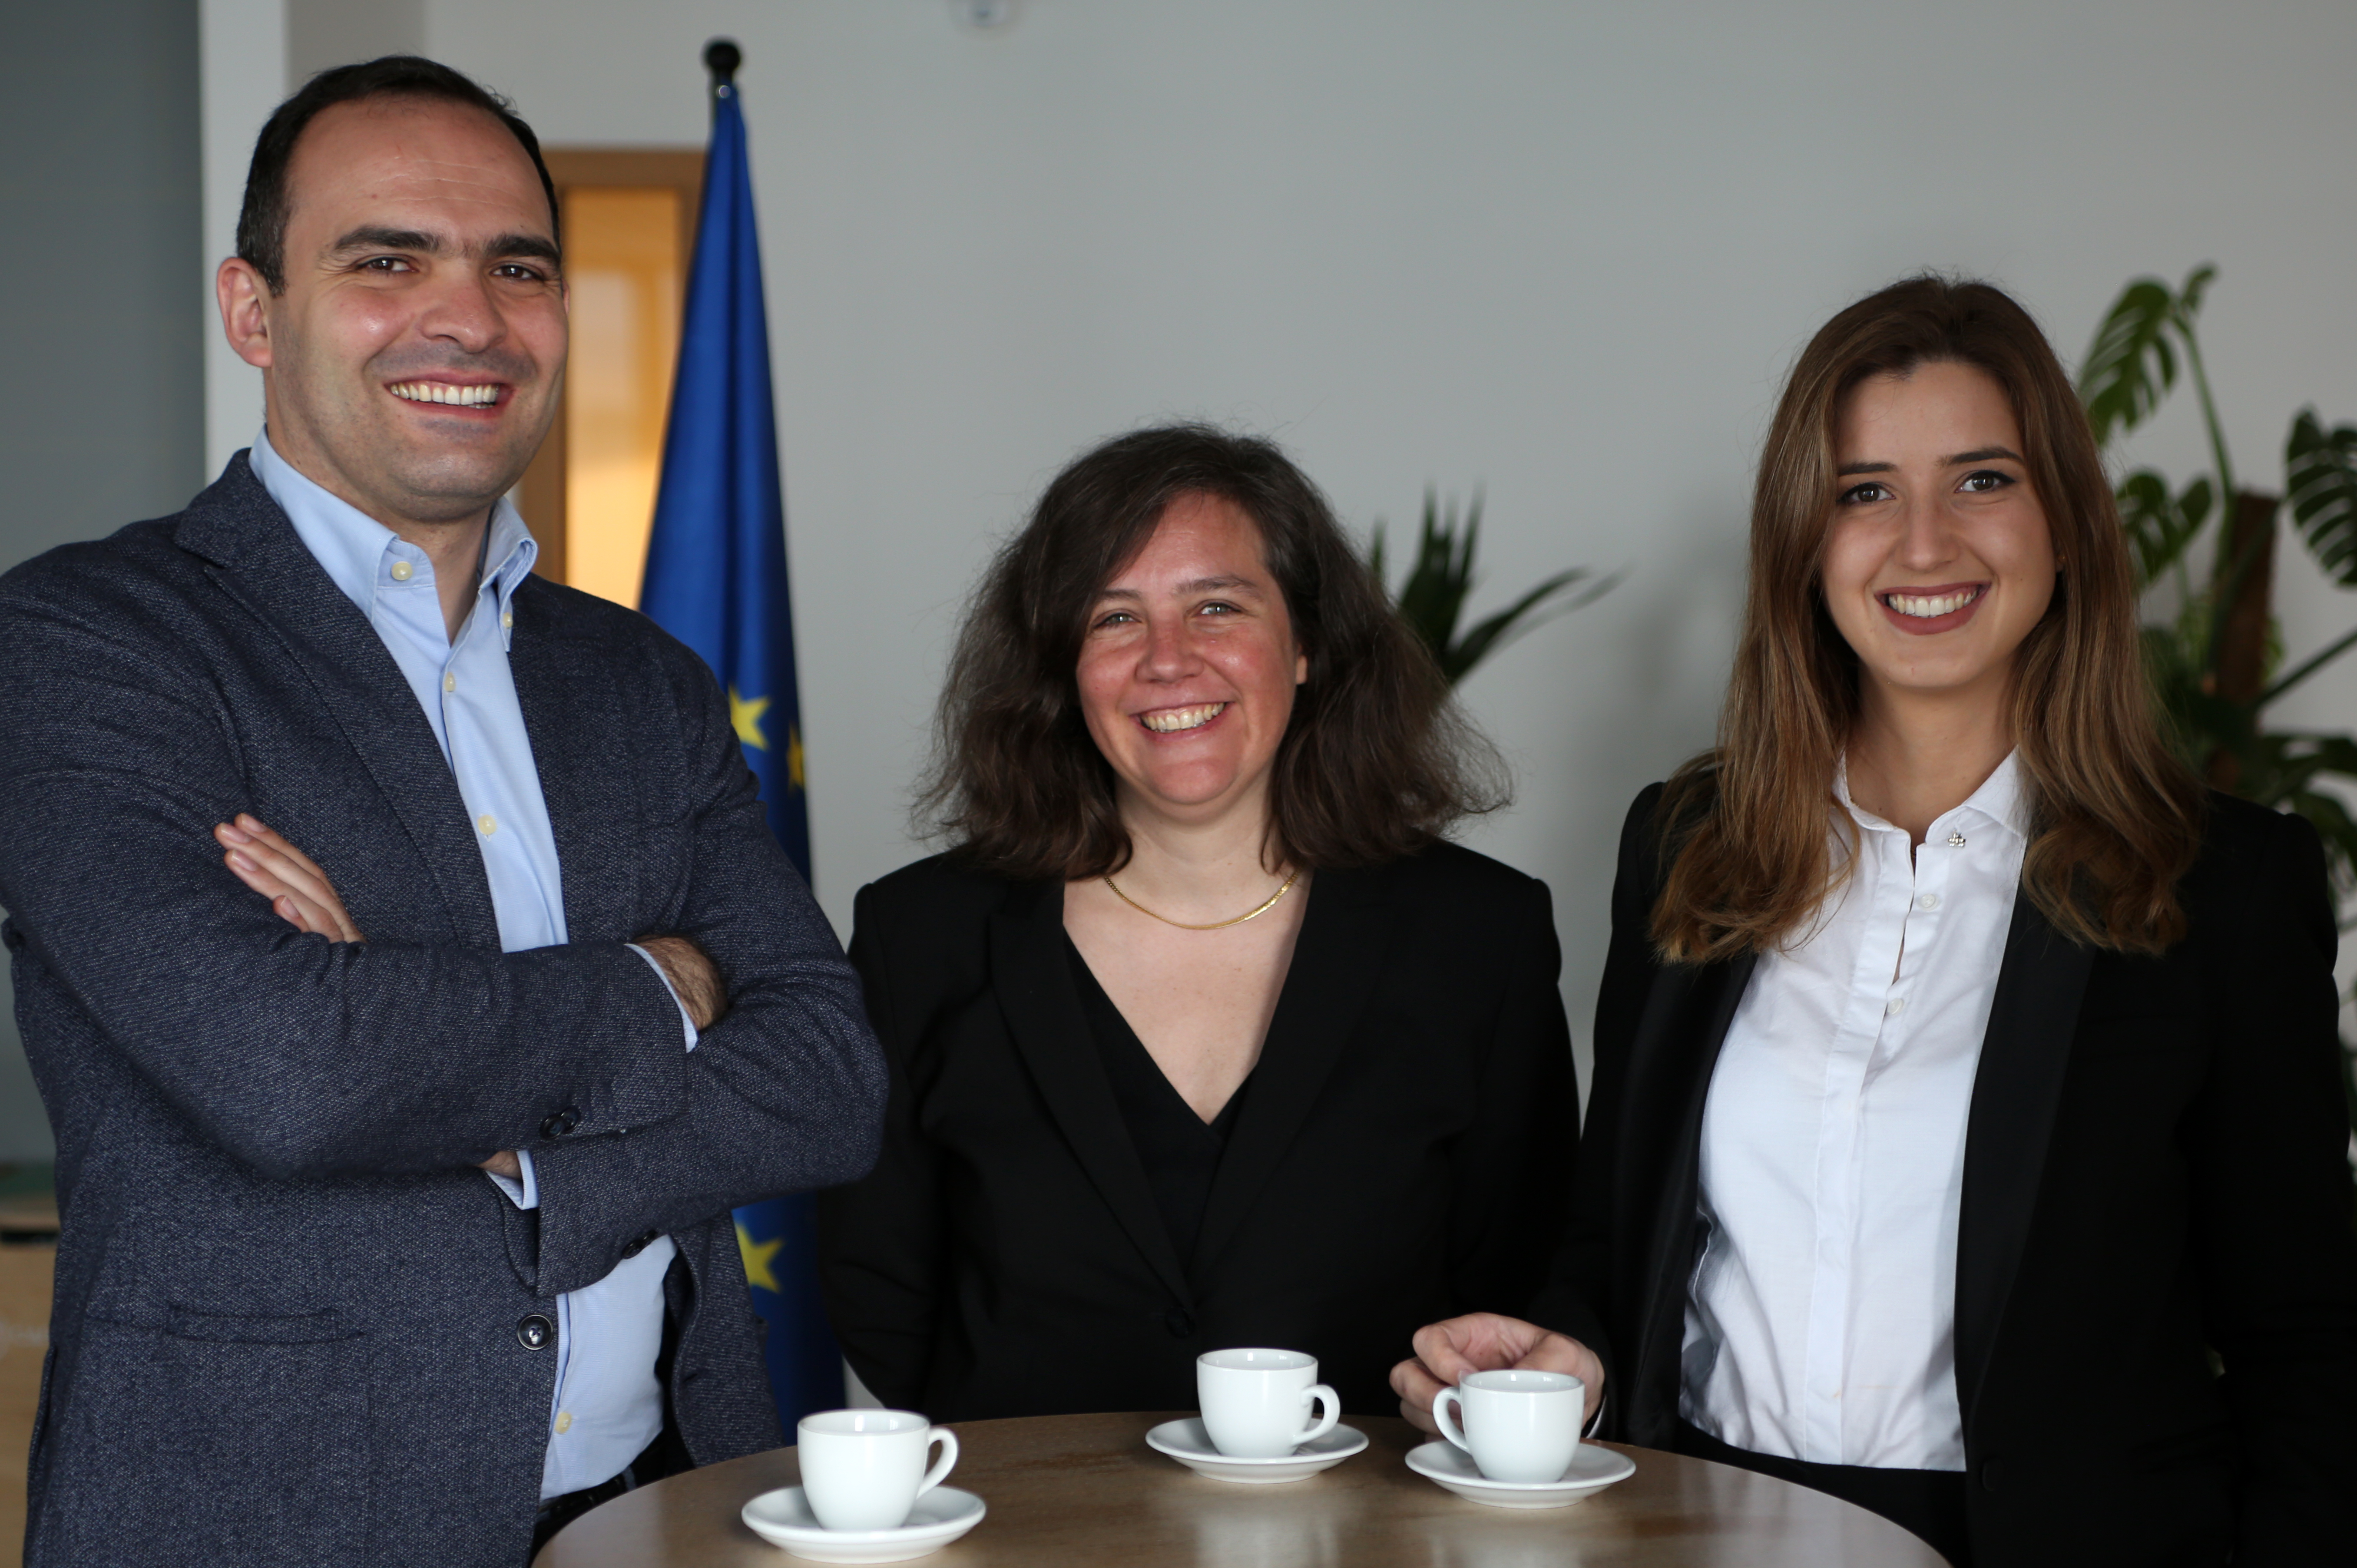 Fernando Pires, Raphaelle Stremsdoerfer and Joana Neto from the EBA AML Unit are featured in the 2021 Annual Report  with an interview on the establishment of EuReCA